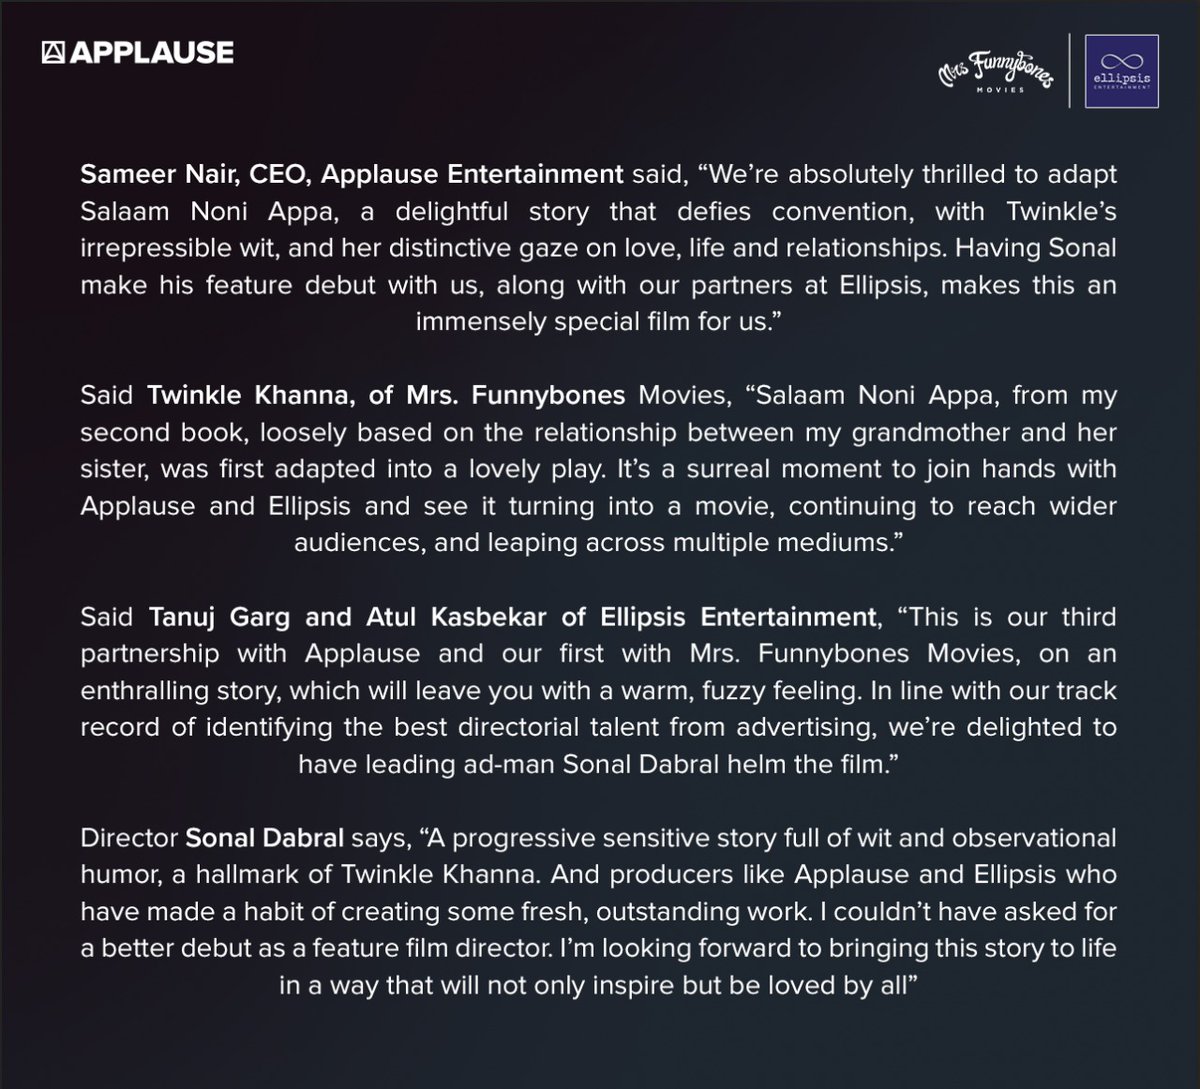 APPLAUSE - ELLIPSIS - MRS FUNNYBONES MOVIES COLLABORATE FOR NEW FILM... #ApplauseEntertainment, #EllipsisEntertainment, #MrsFunnybonesMovies collaborate for new film, adapted from #TwinkleKhanna's short story #SalaamNoniAppa. Directorial debut of ad man #SonalDabral. #SameerNair